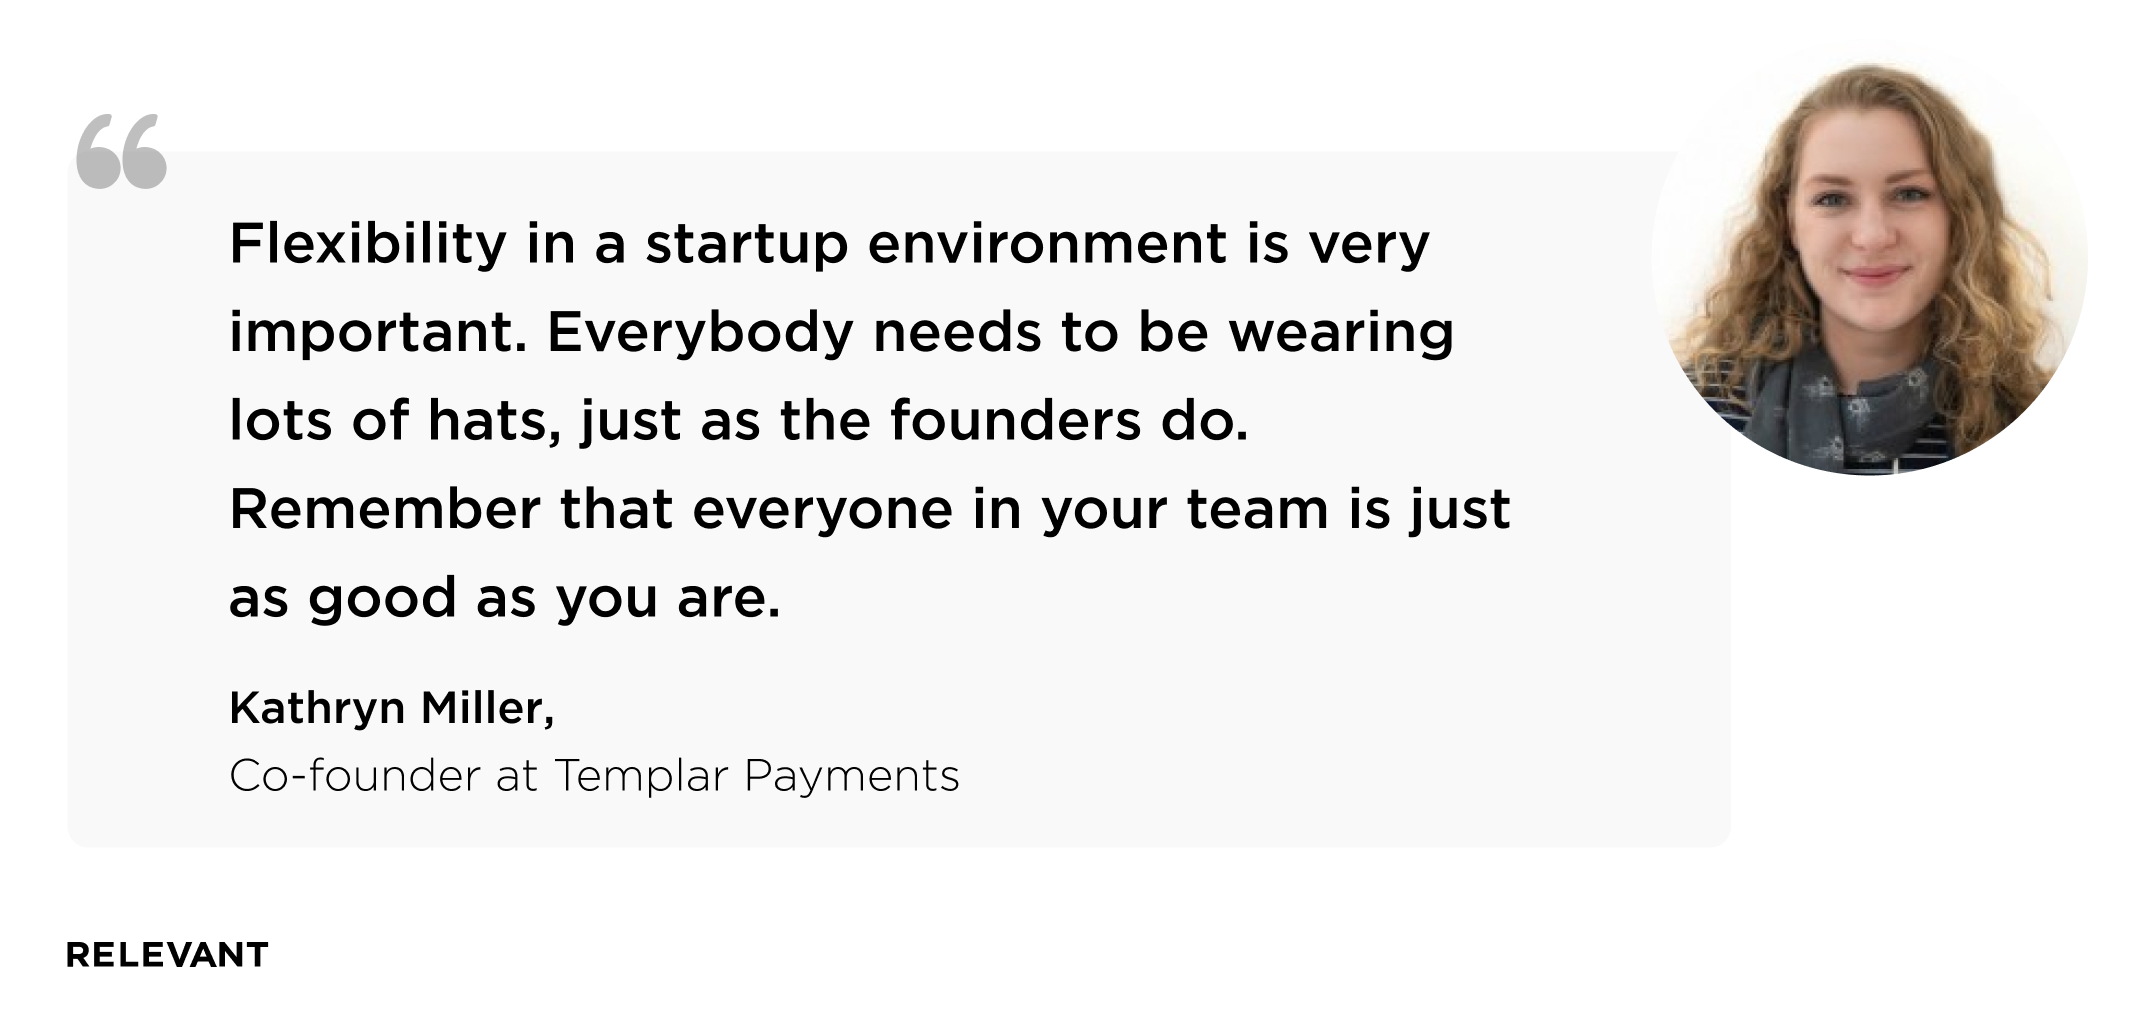 Kathryn Miller, co-founder of Templar Payments